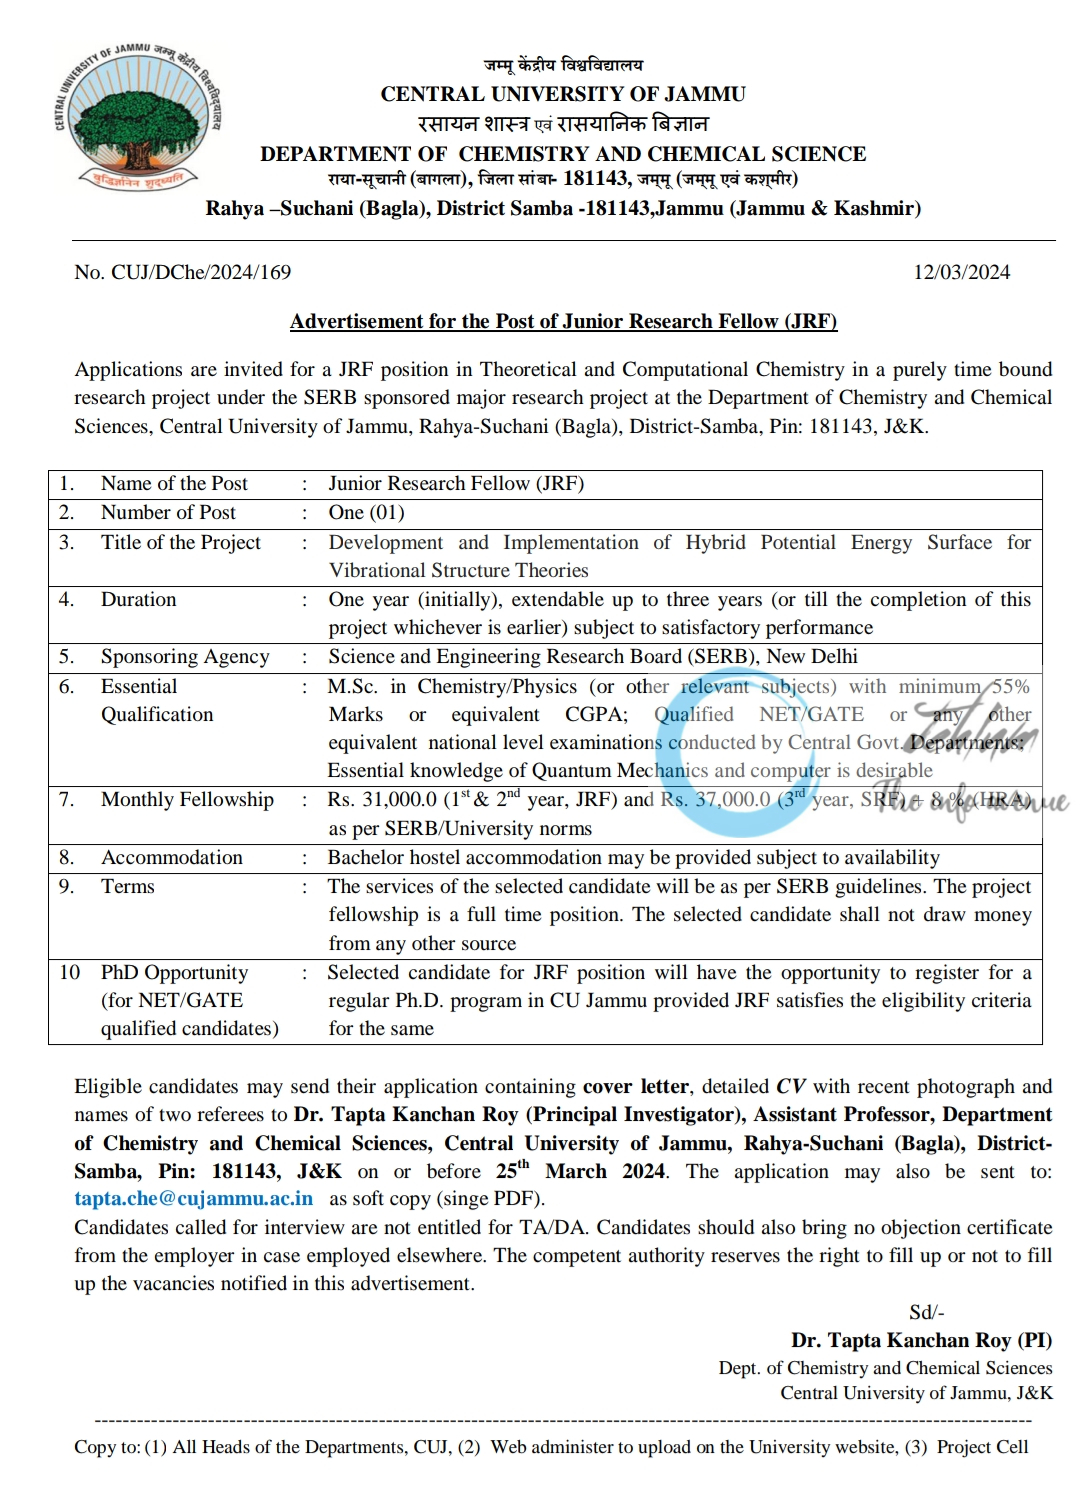 CENTRAL UNIVERSITY OF JAMMU DEPTT OF CHEMISTRY AND CHEMICAL SCIENCE JRF ADVERTISEMENT 2024